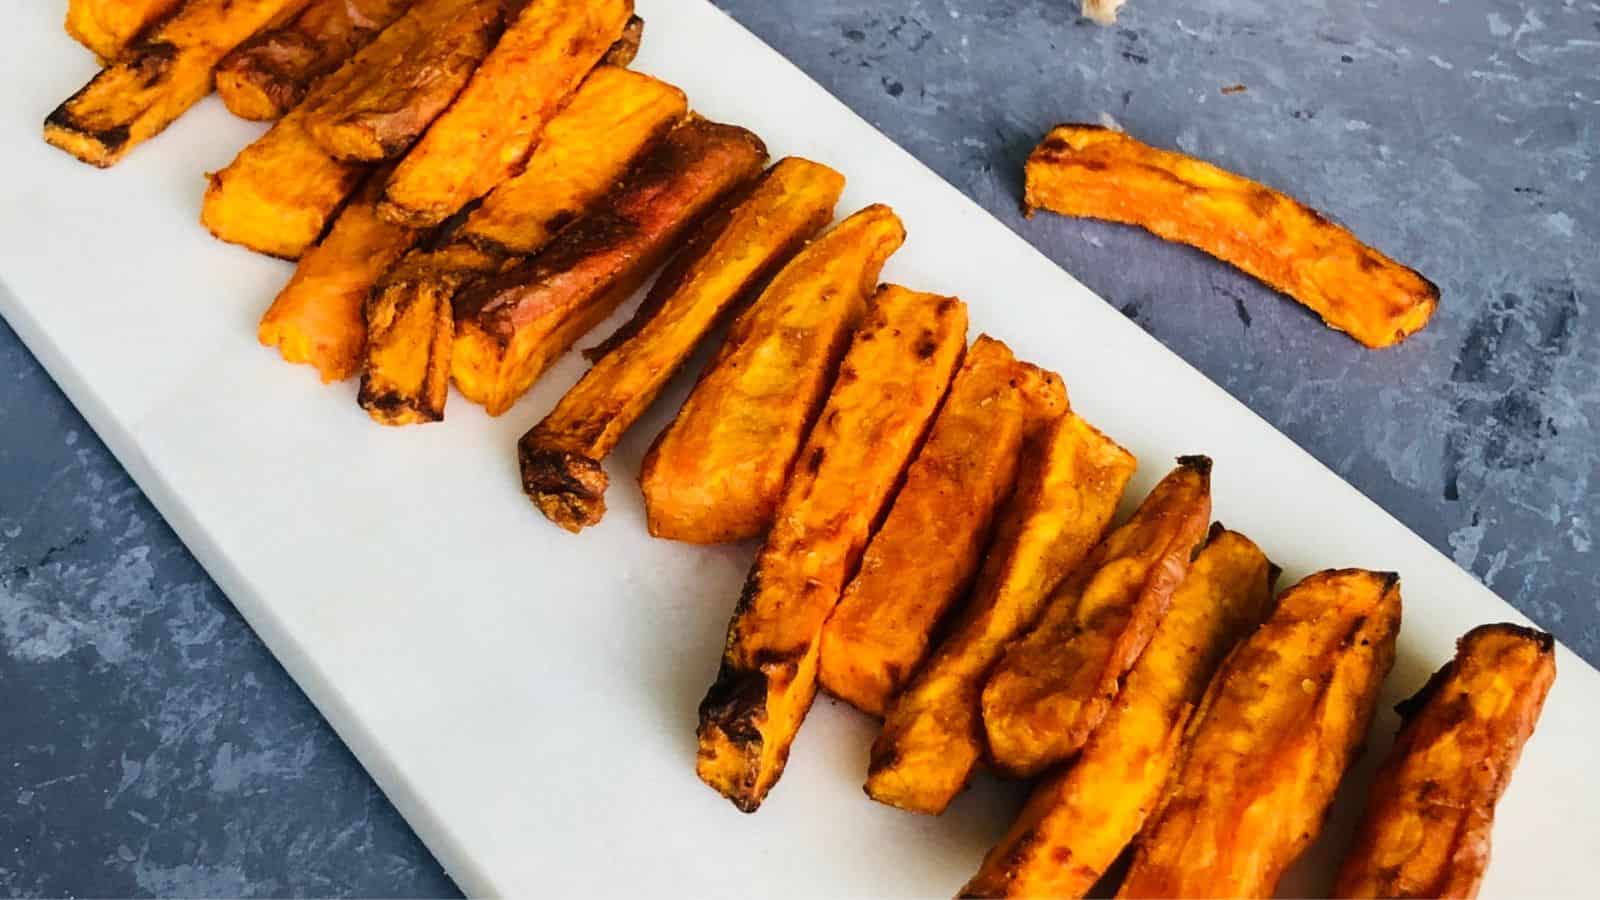 Roasted sweet potato fries arranged neatly on a white rectangular plate, with a dark gray background.